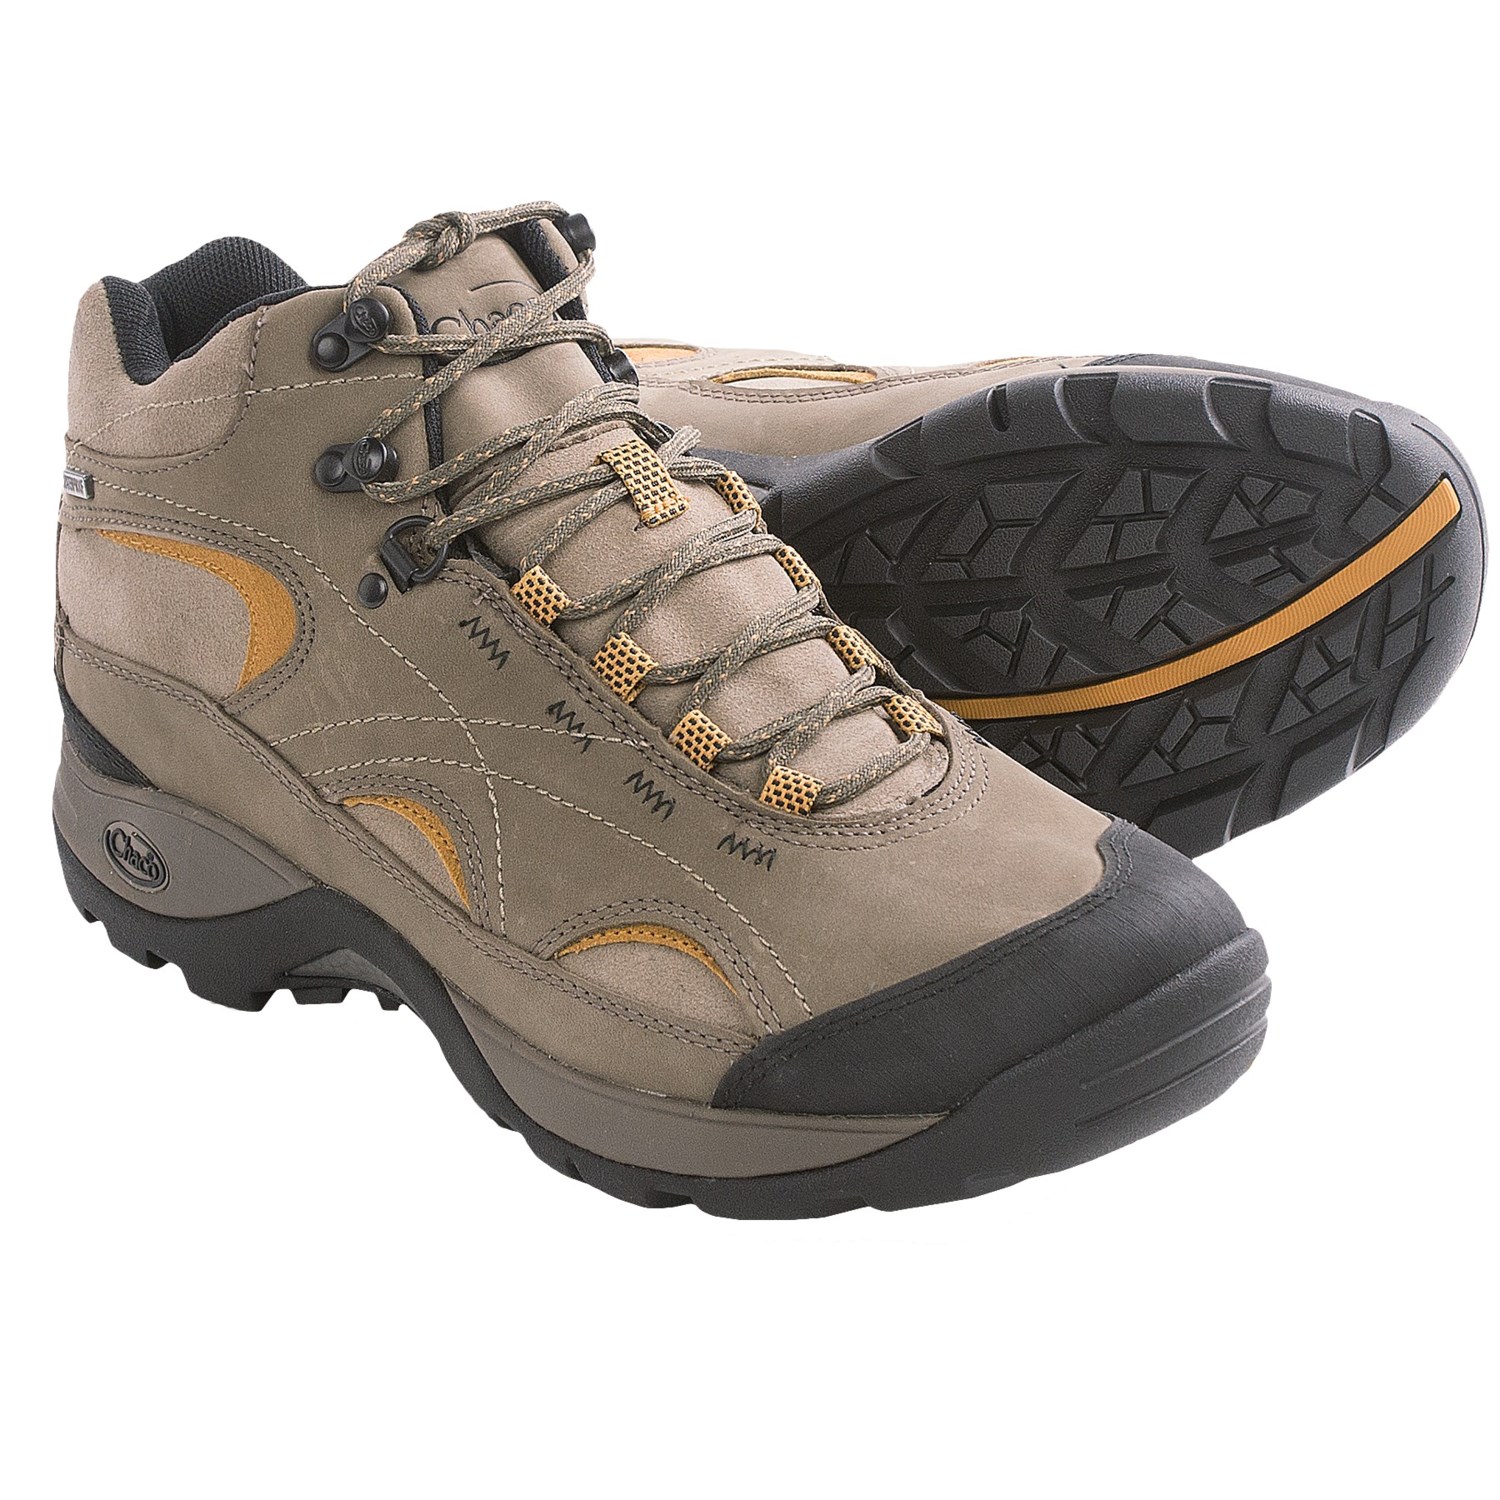 Chaco Hinterland Mid Hiking Boots - Waterproof (For Men) - Save 31%